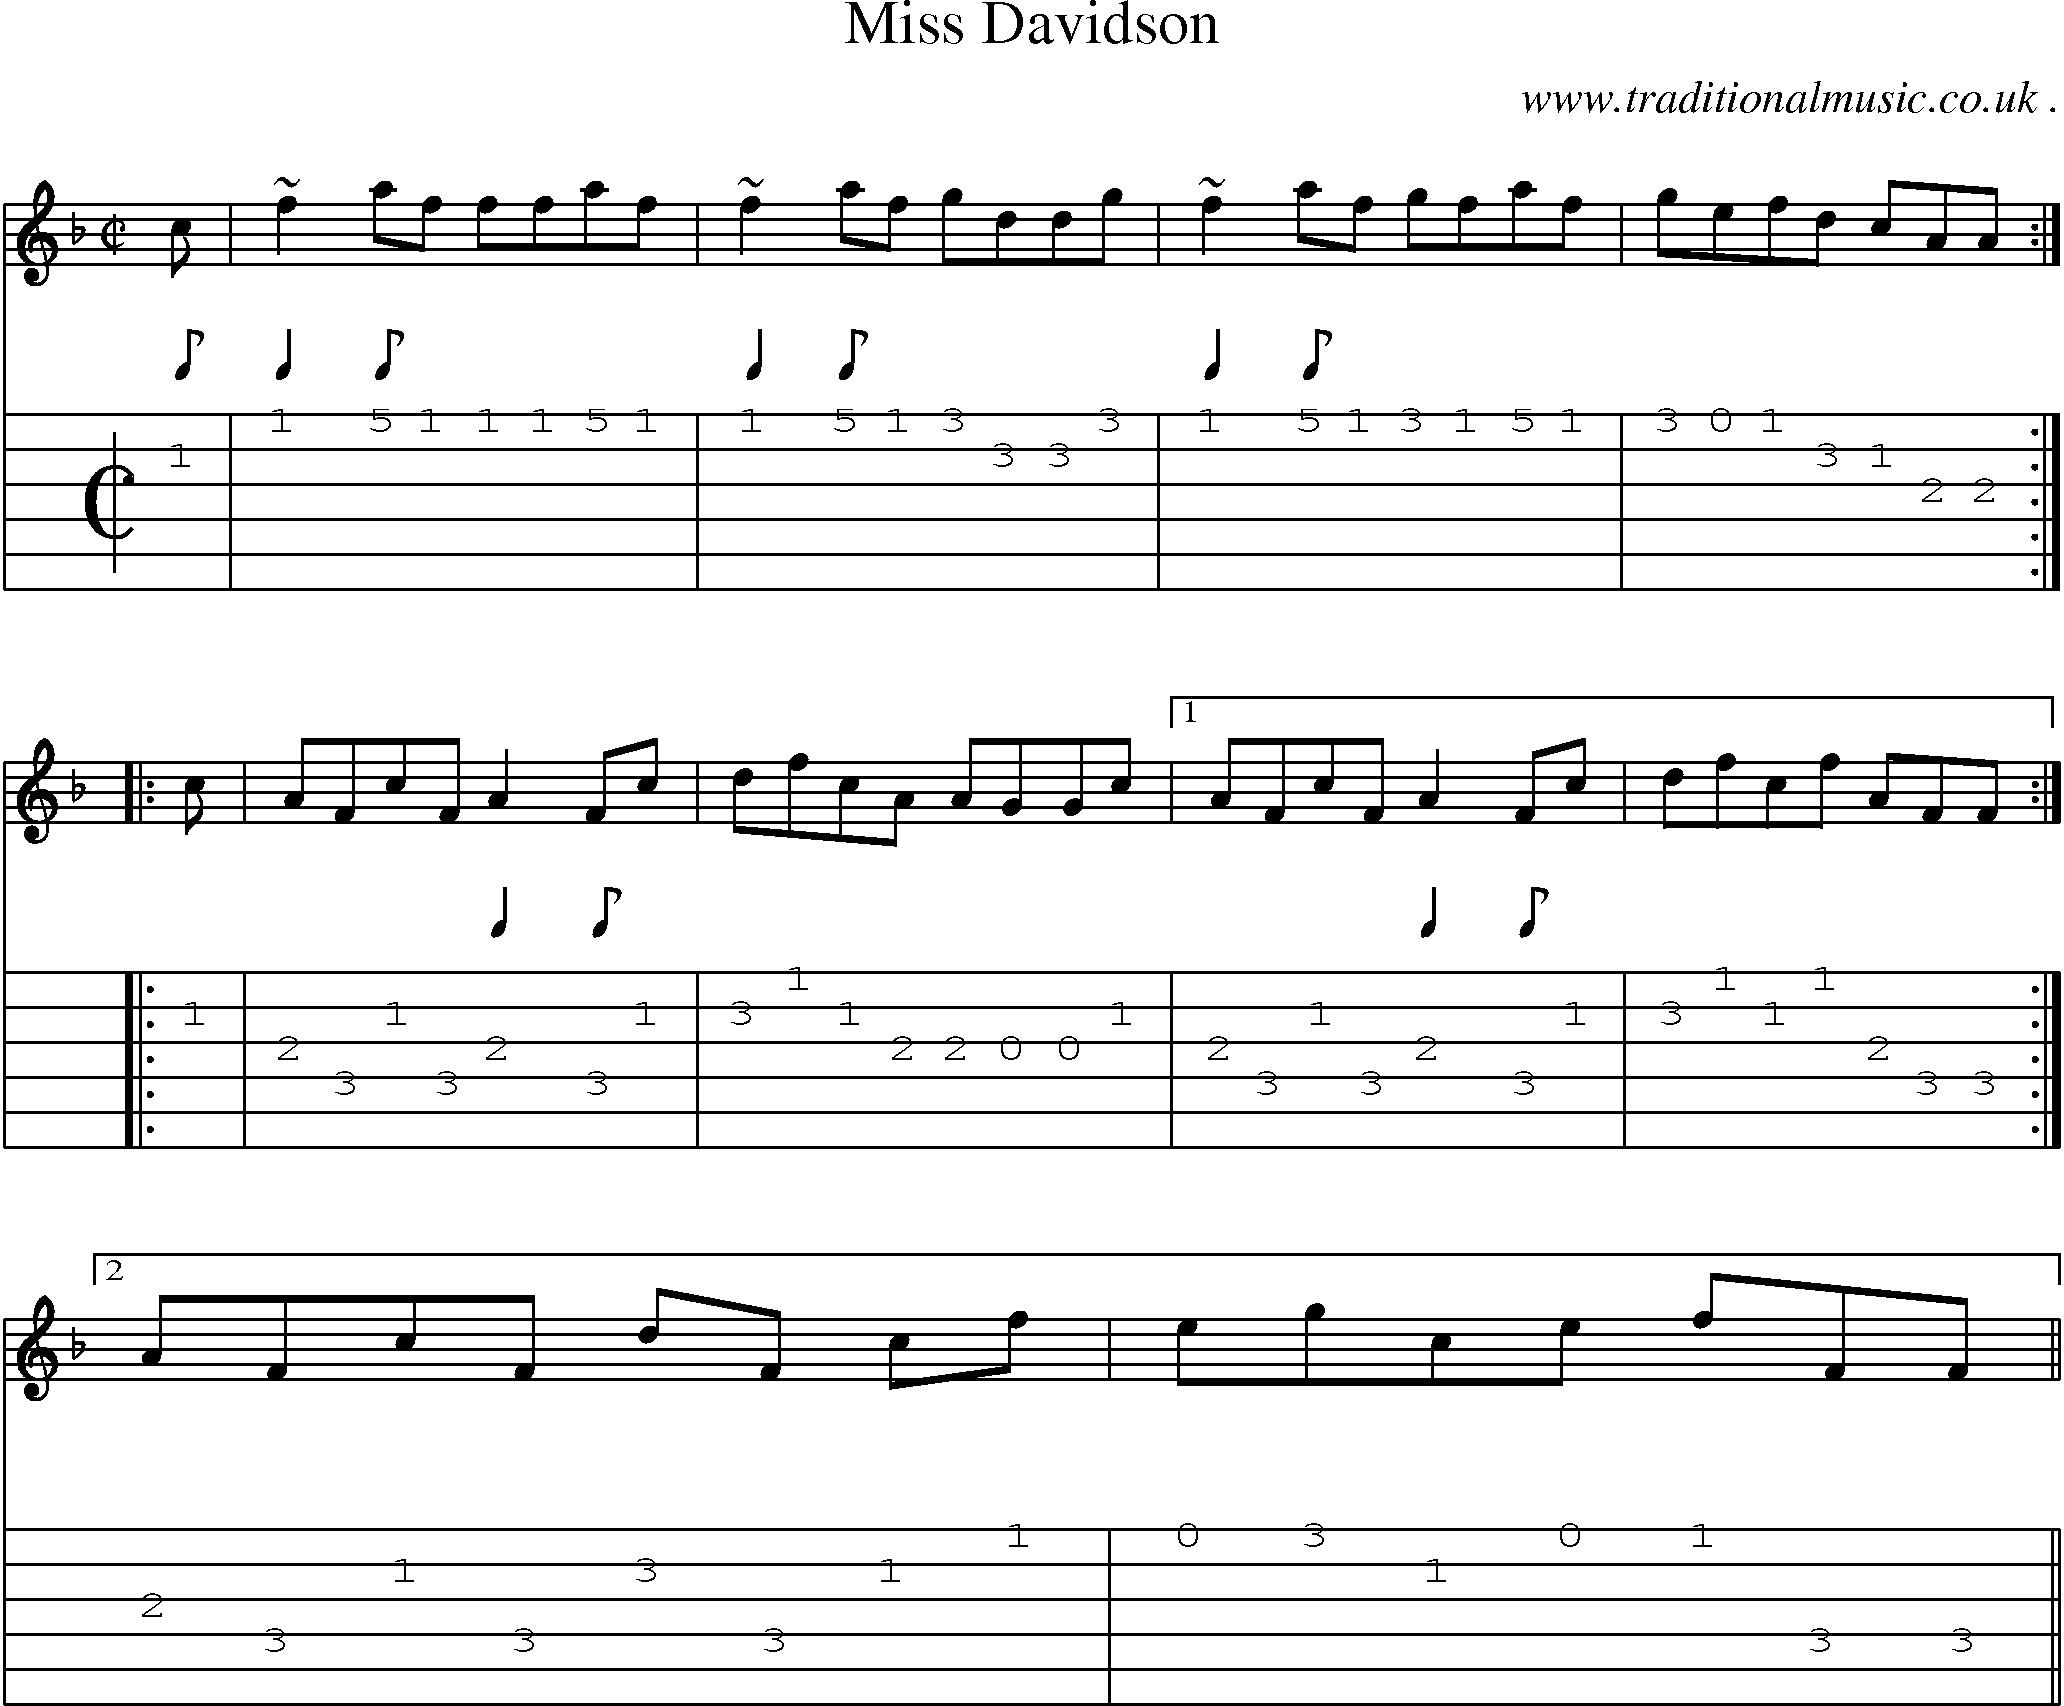 Sheet-music  score, Chords and Guitar Tabs for Miss Davidson